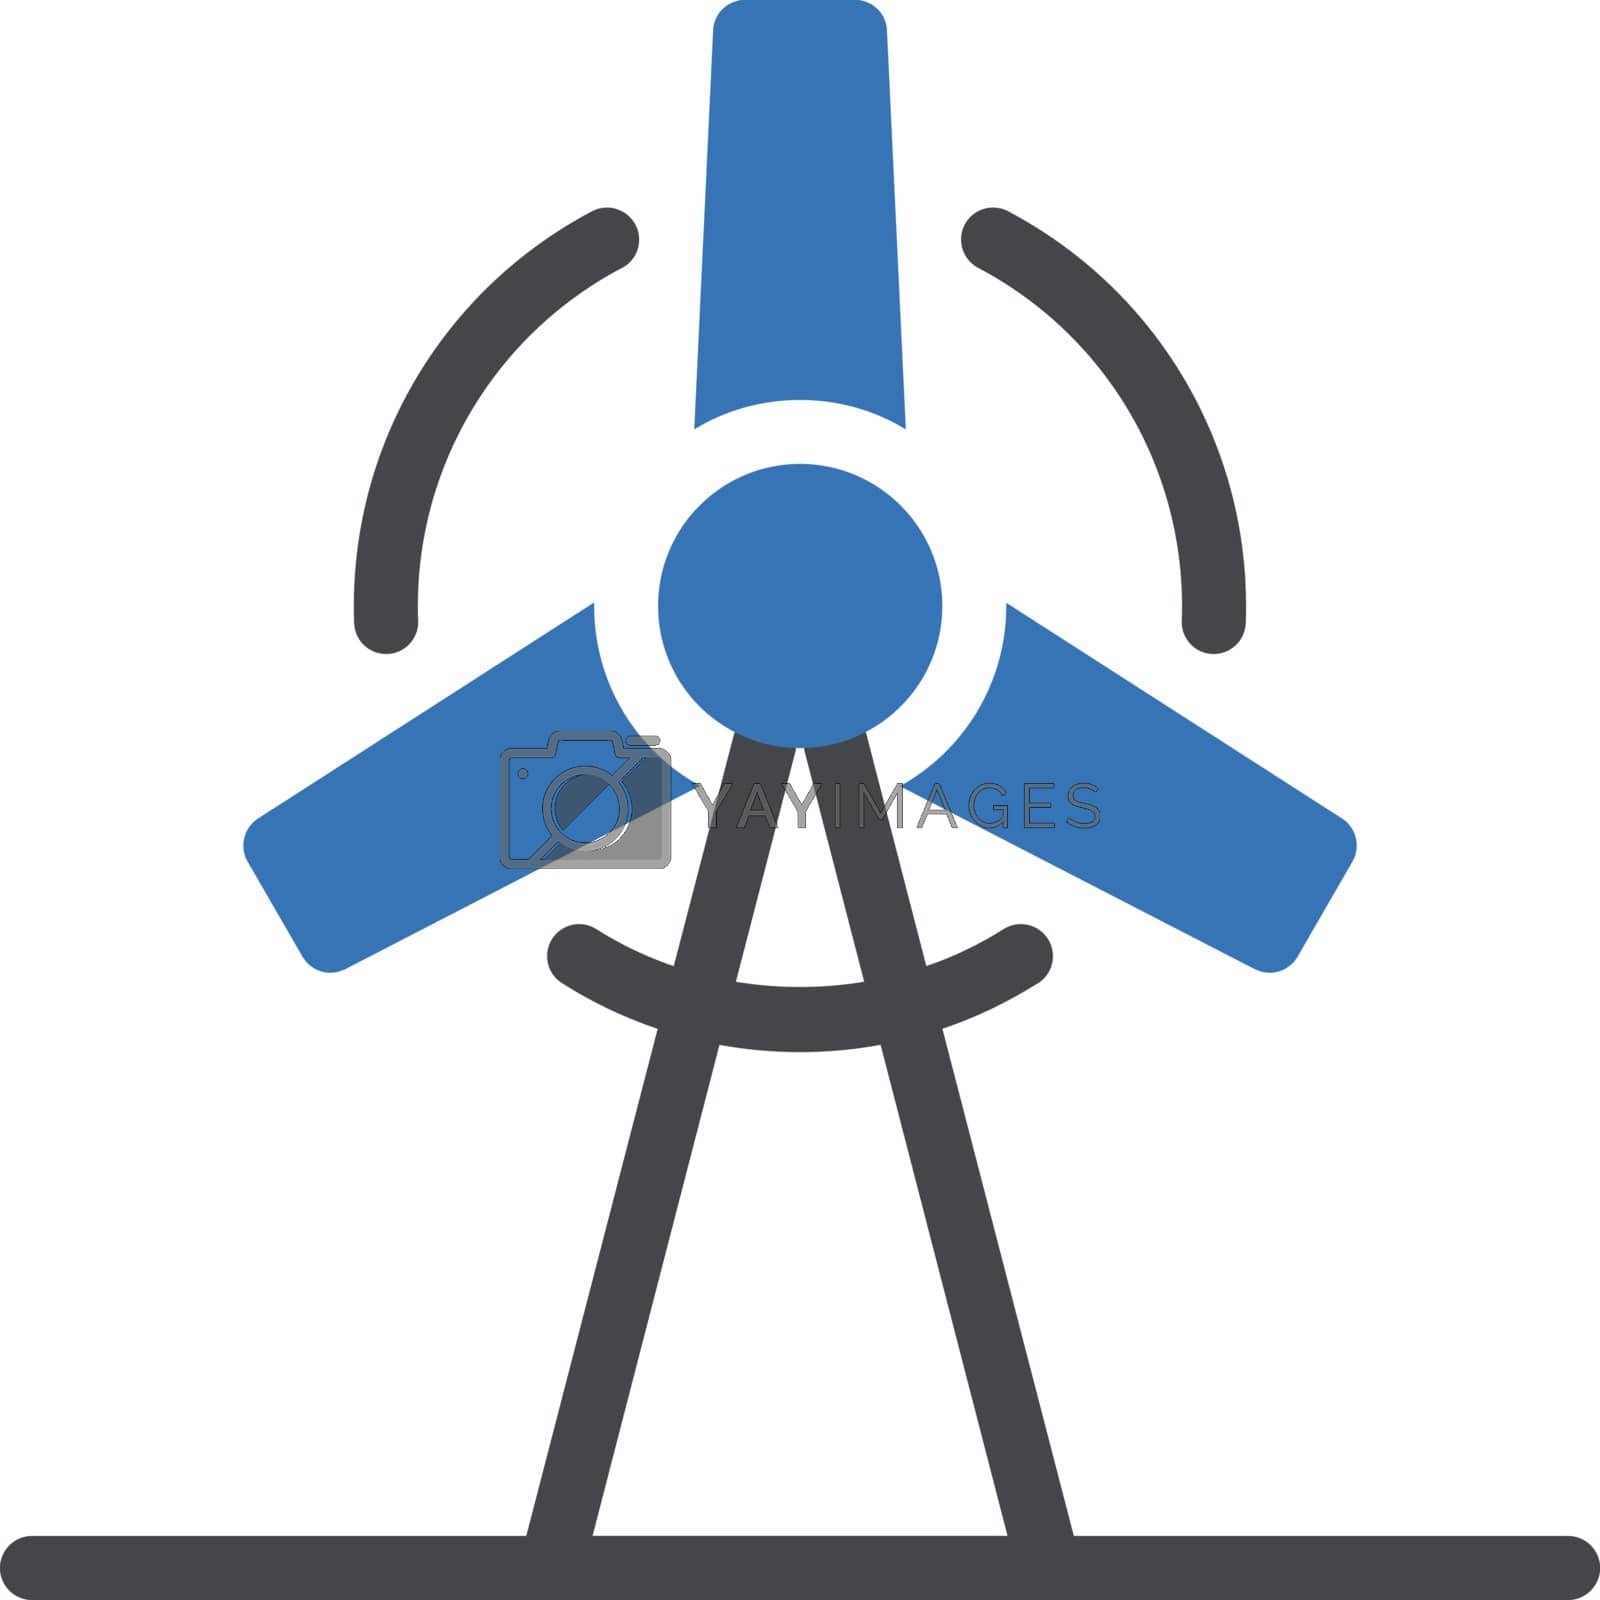 Royalty free image of turbine by vectorstall